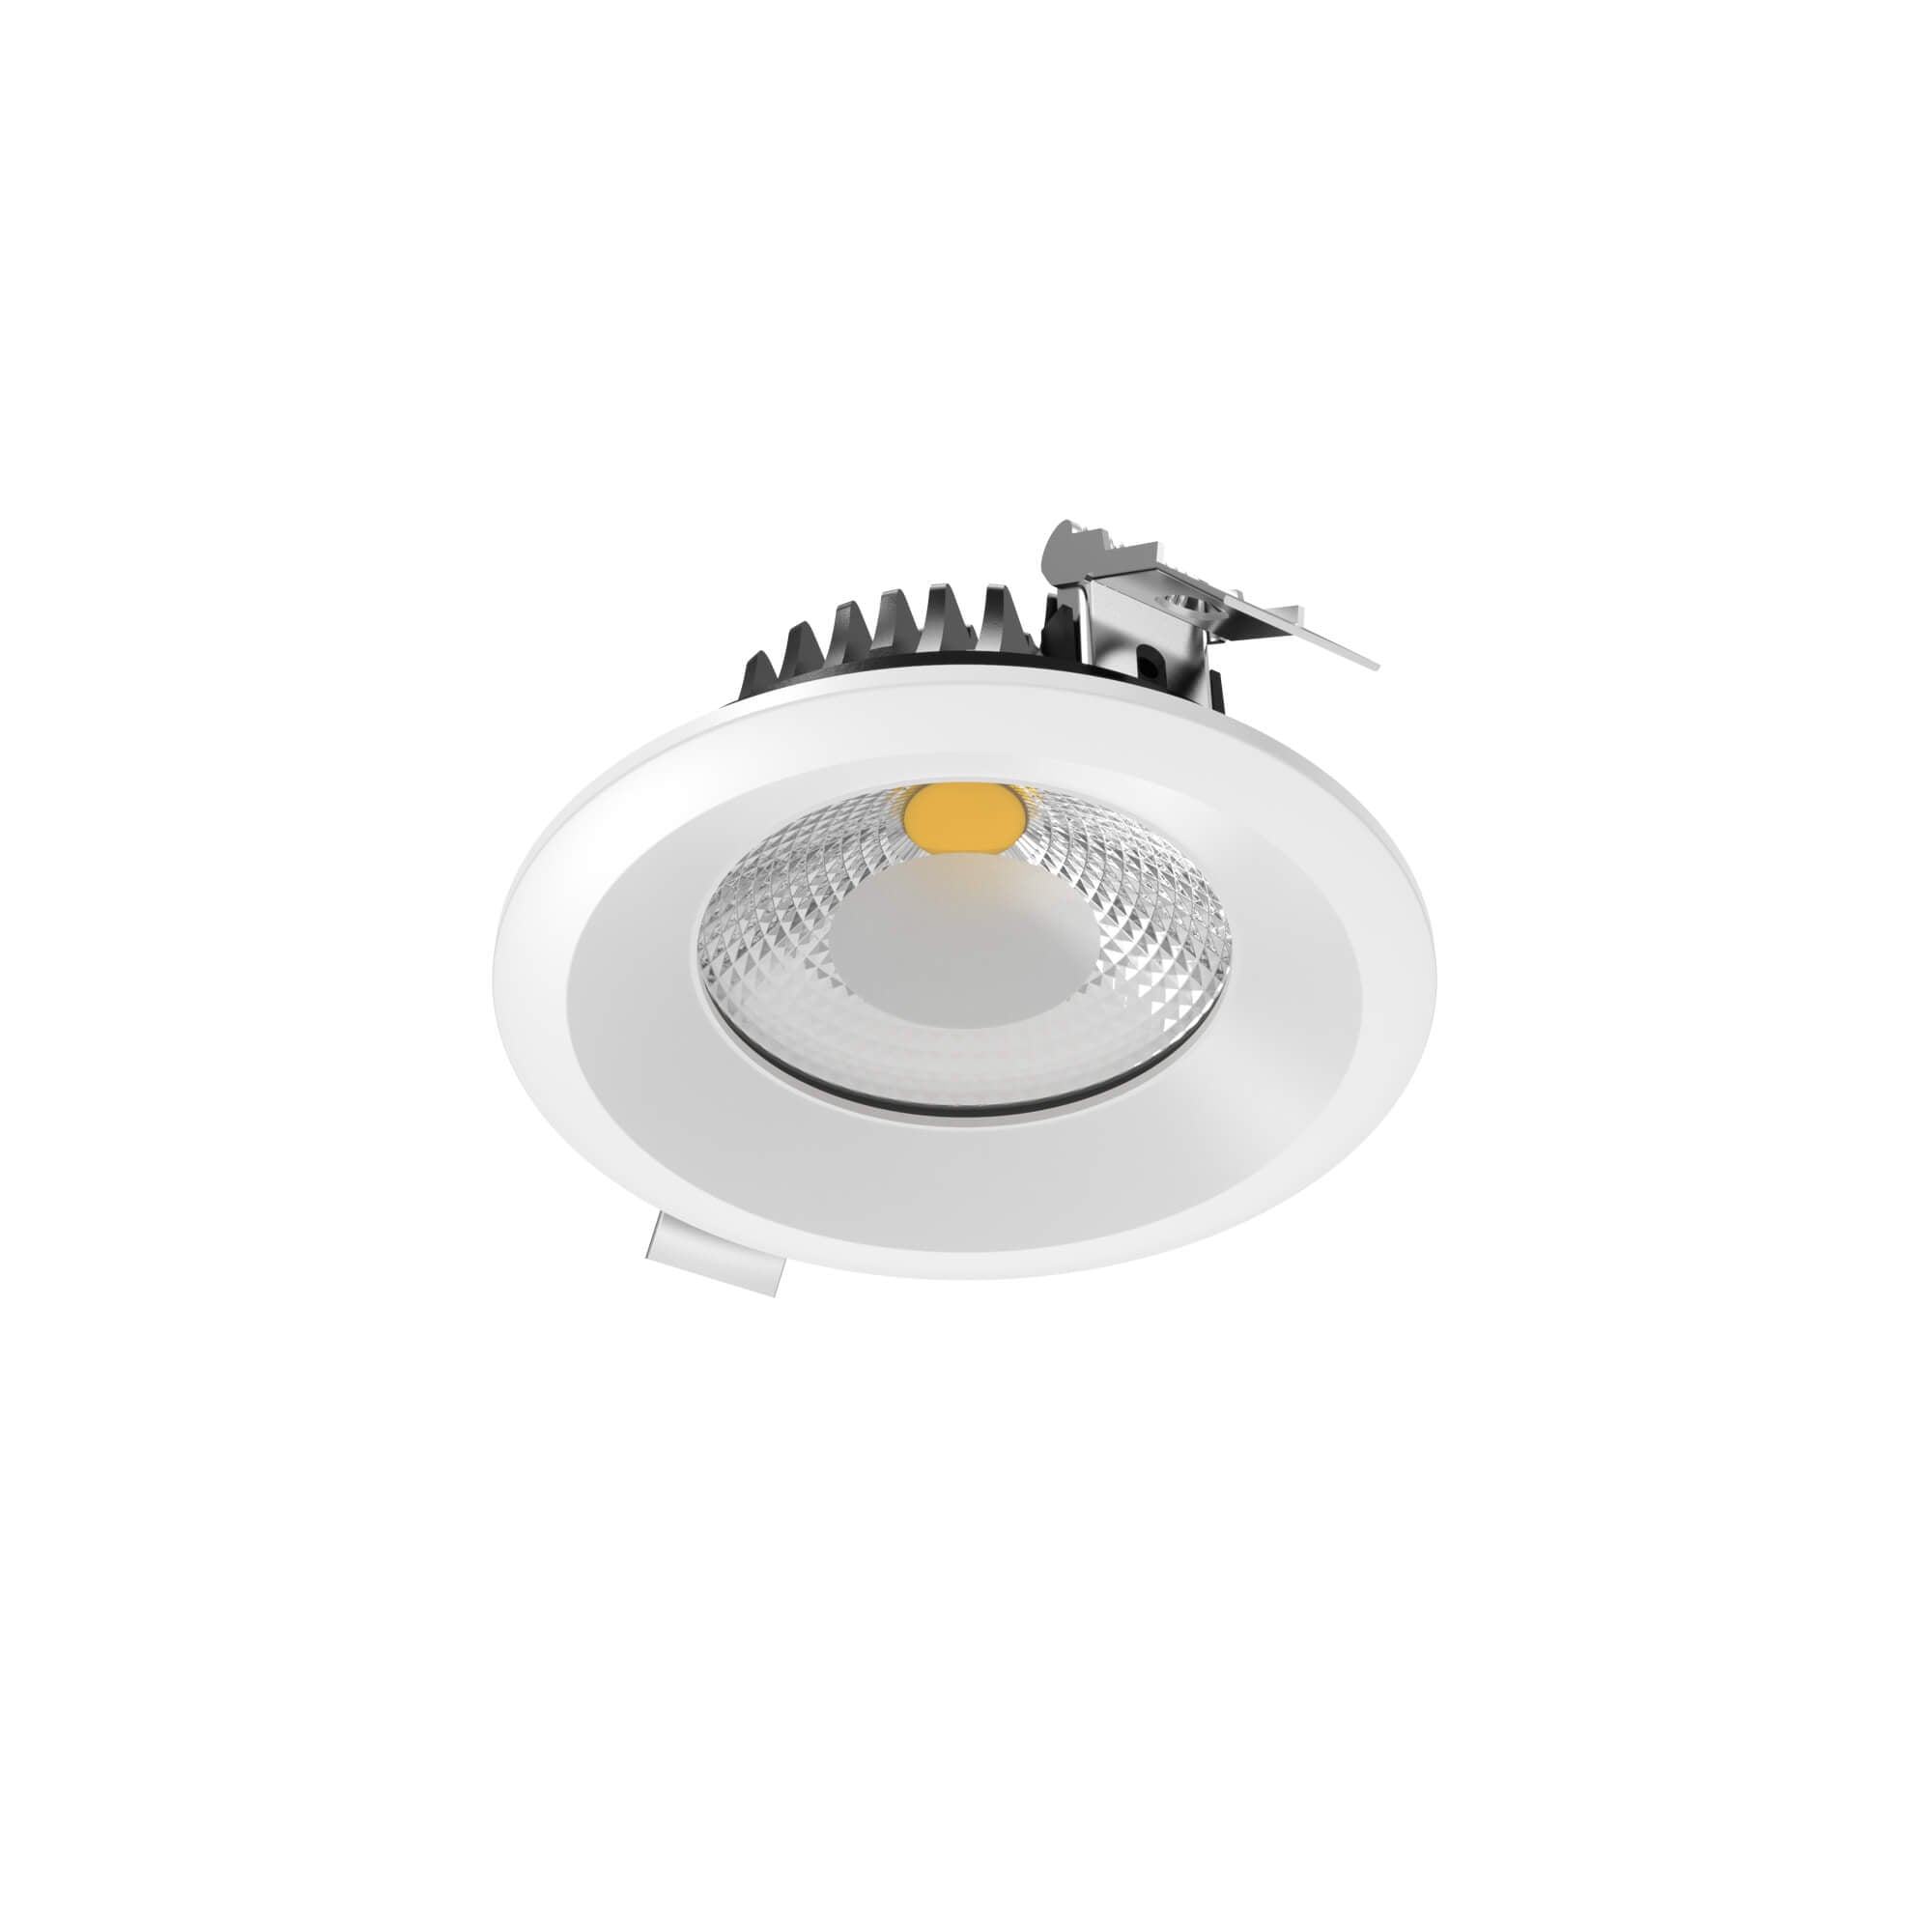 4" High Powered LED Commercial Down Light